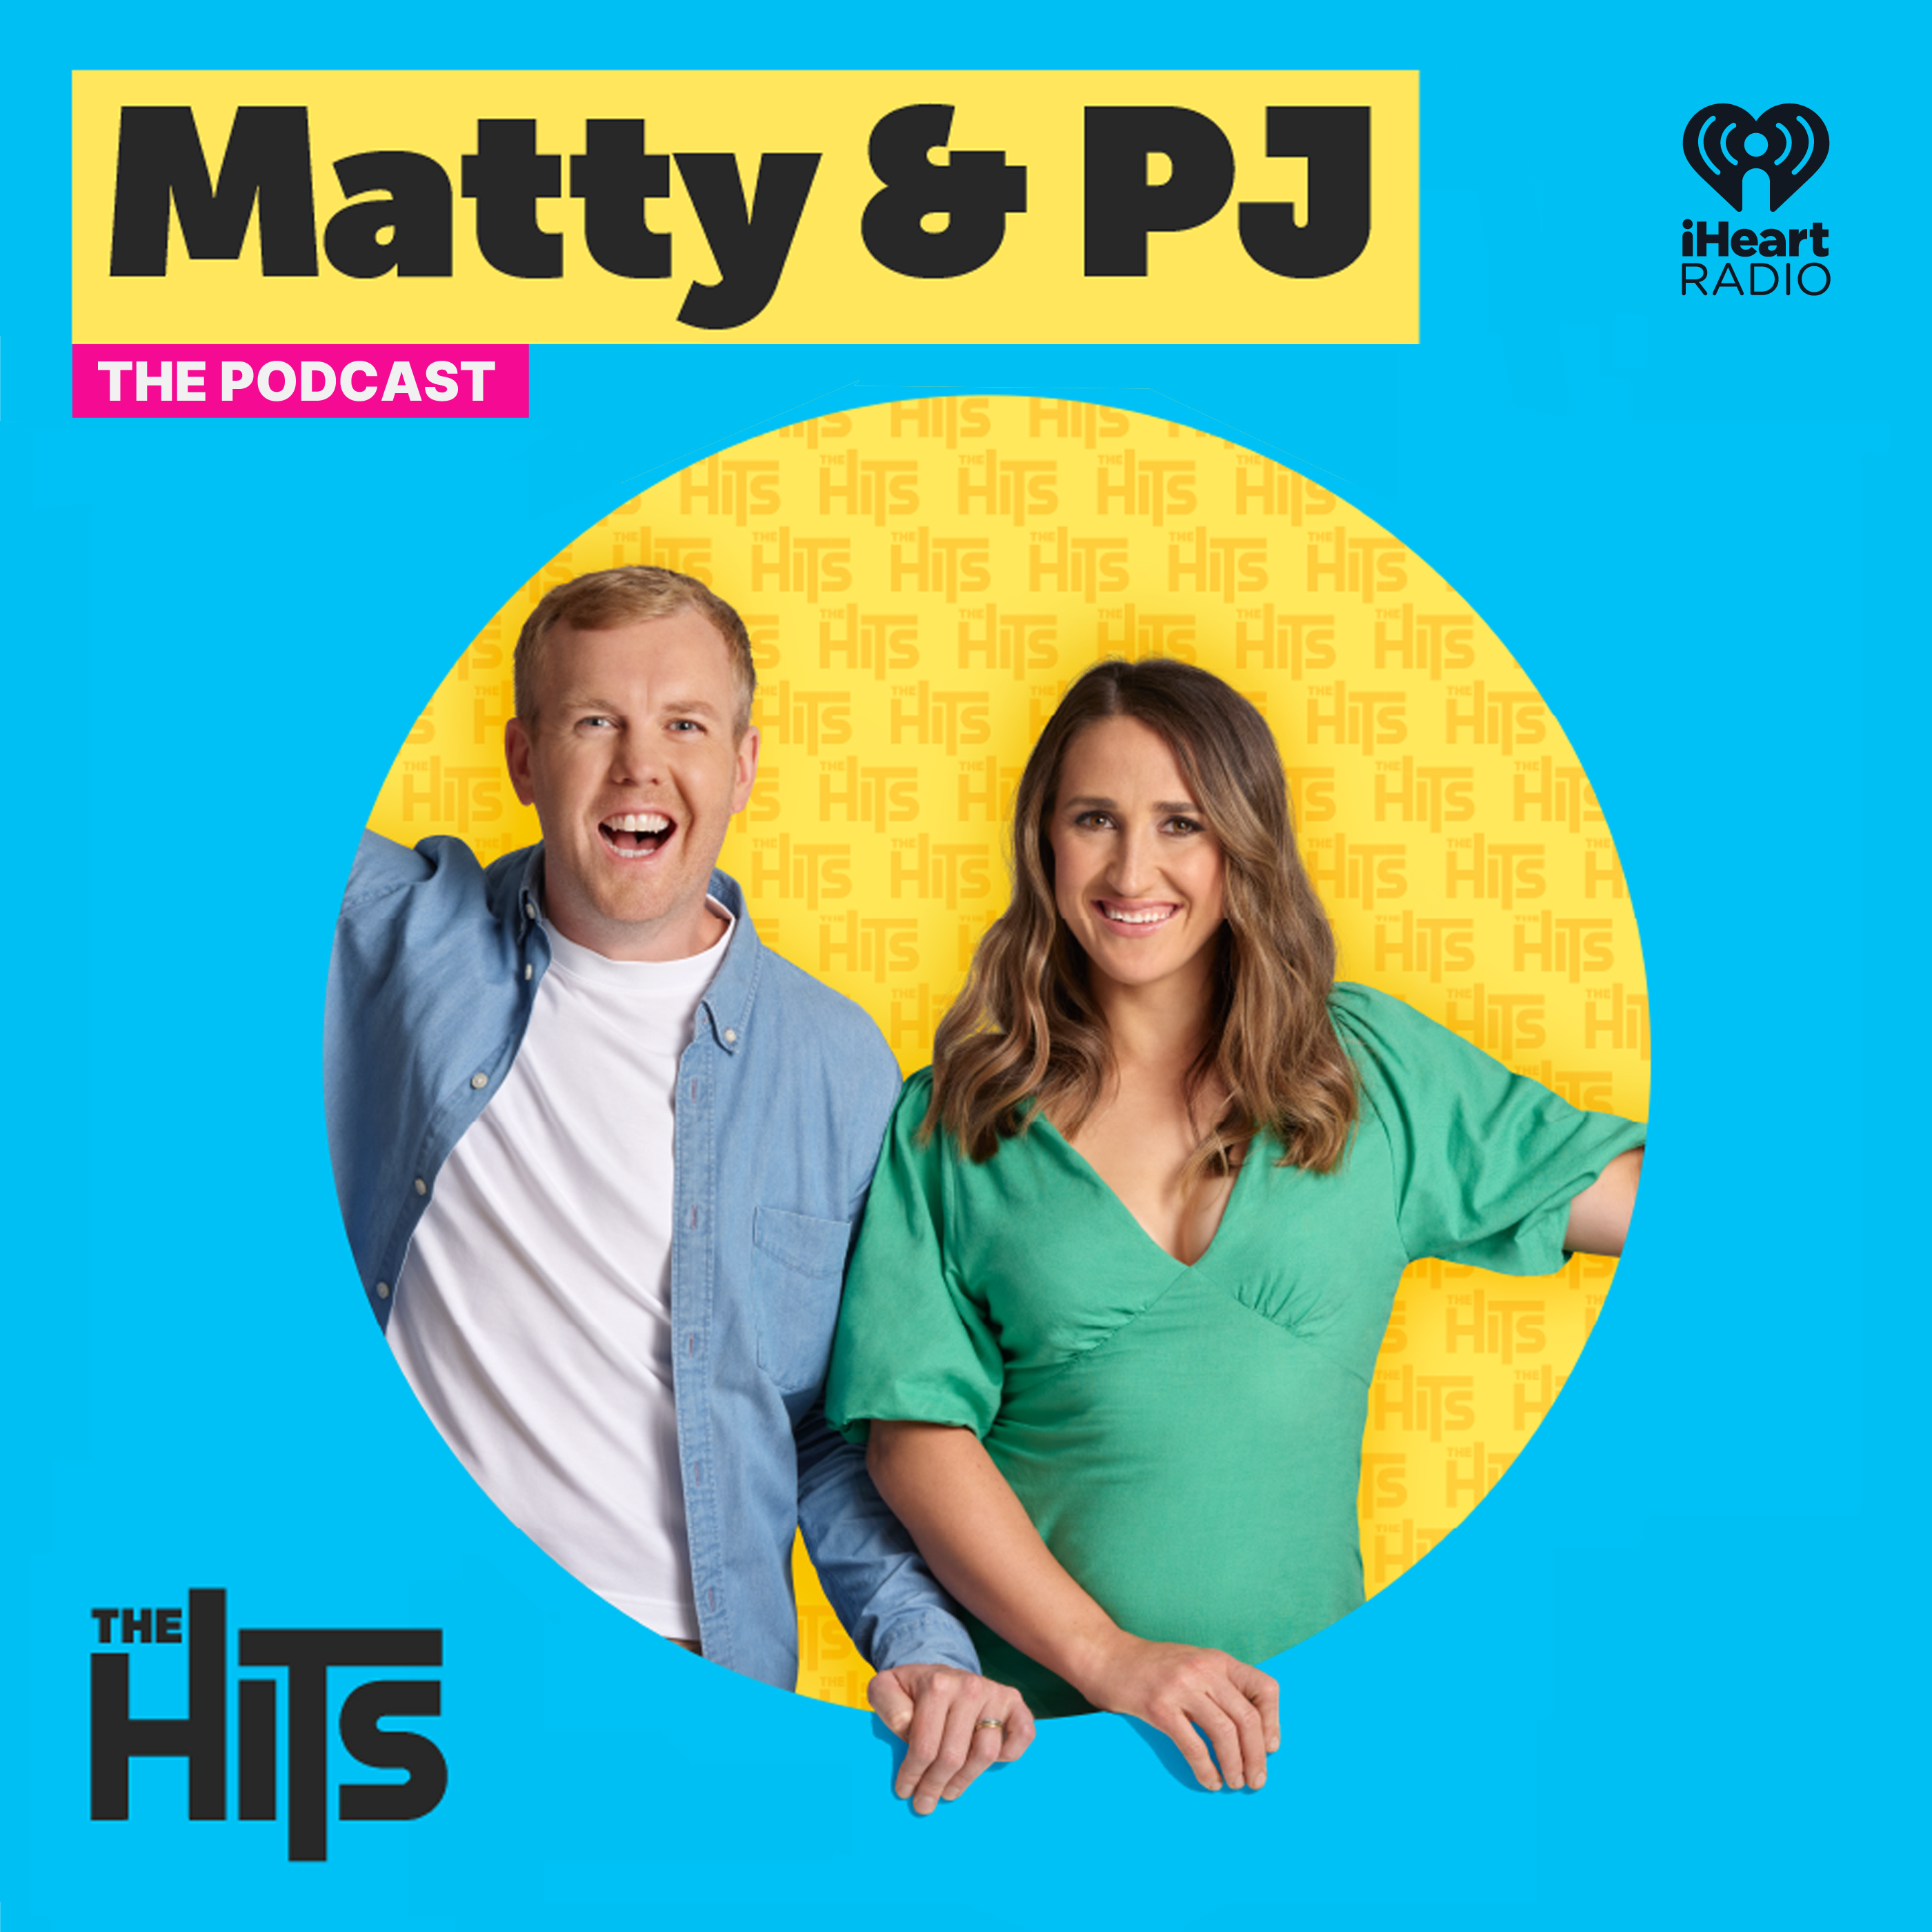 FULL SHOW: What have PJ and her husband not done for two YEARS plus what did Matty's friend do while housesitting?